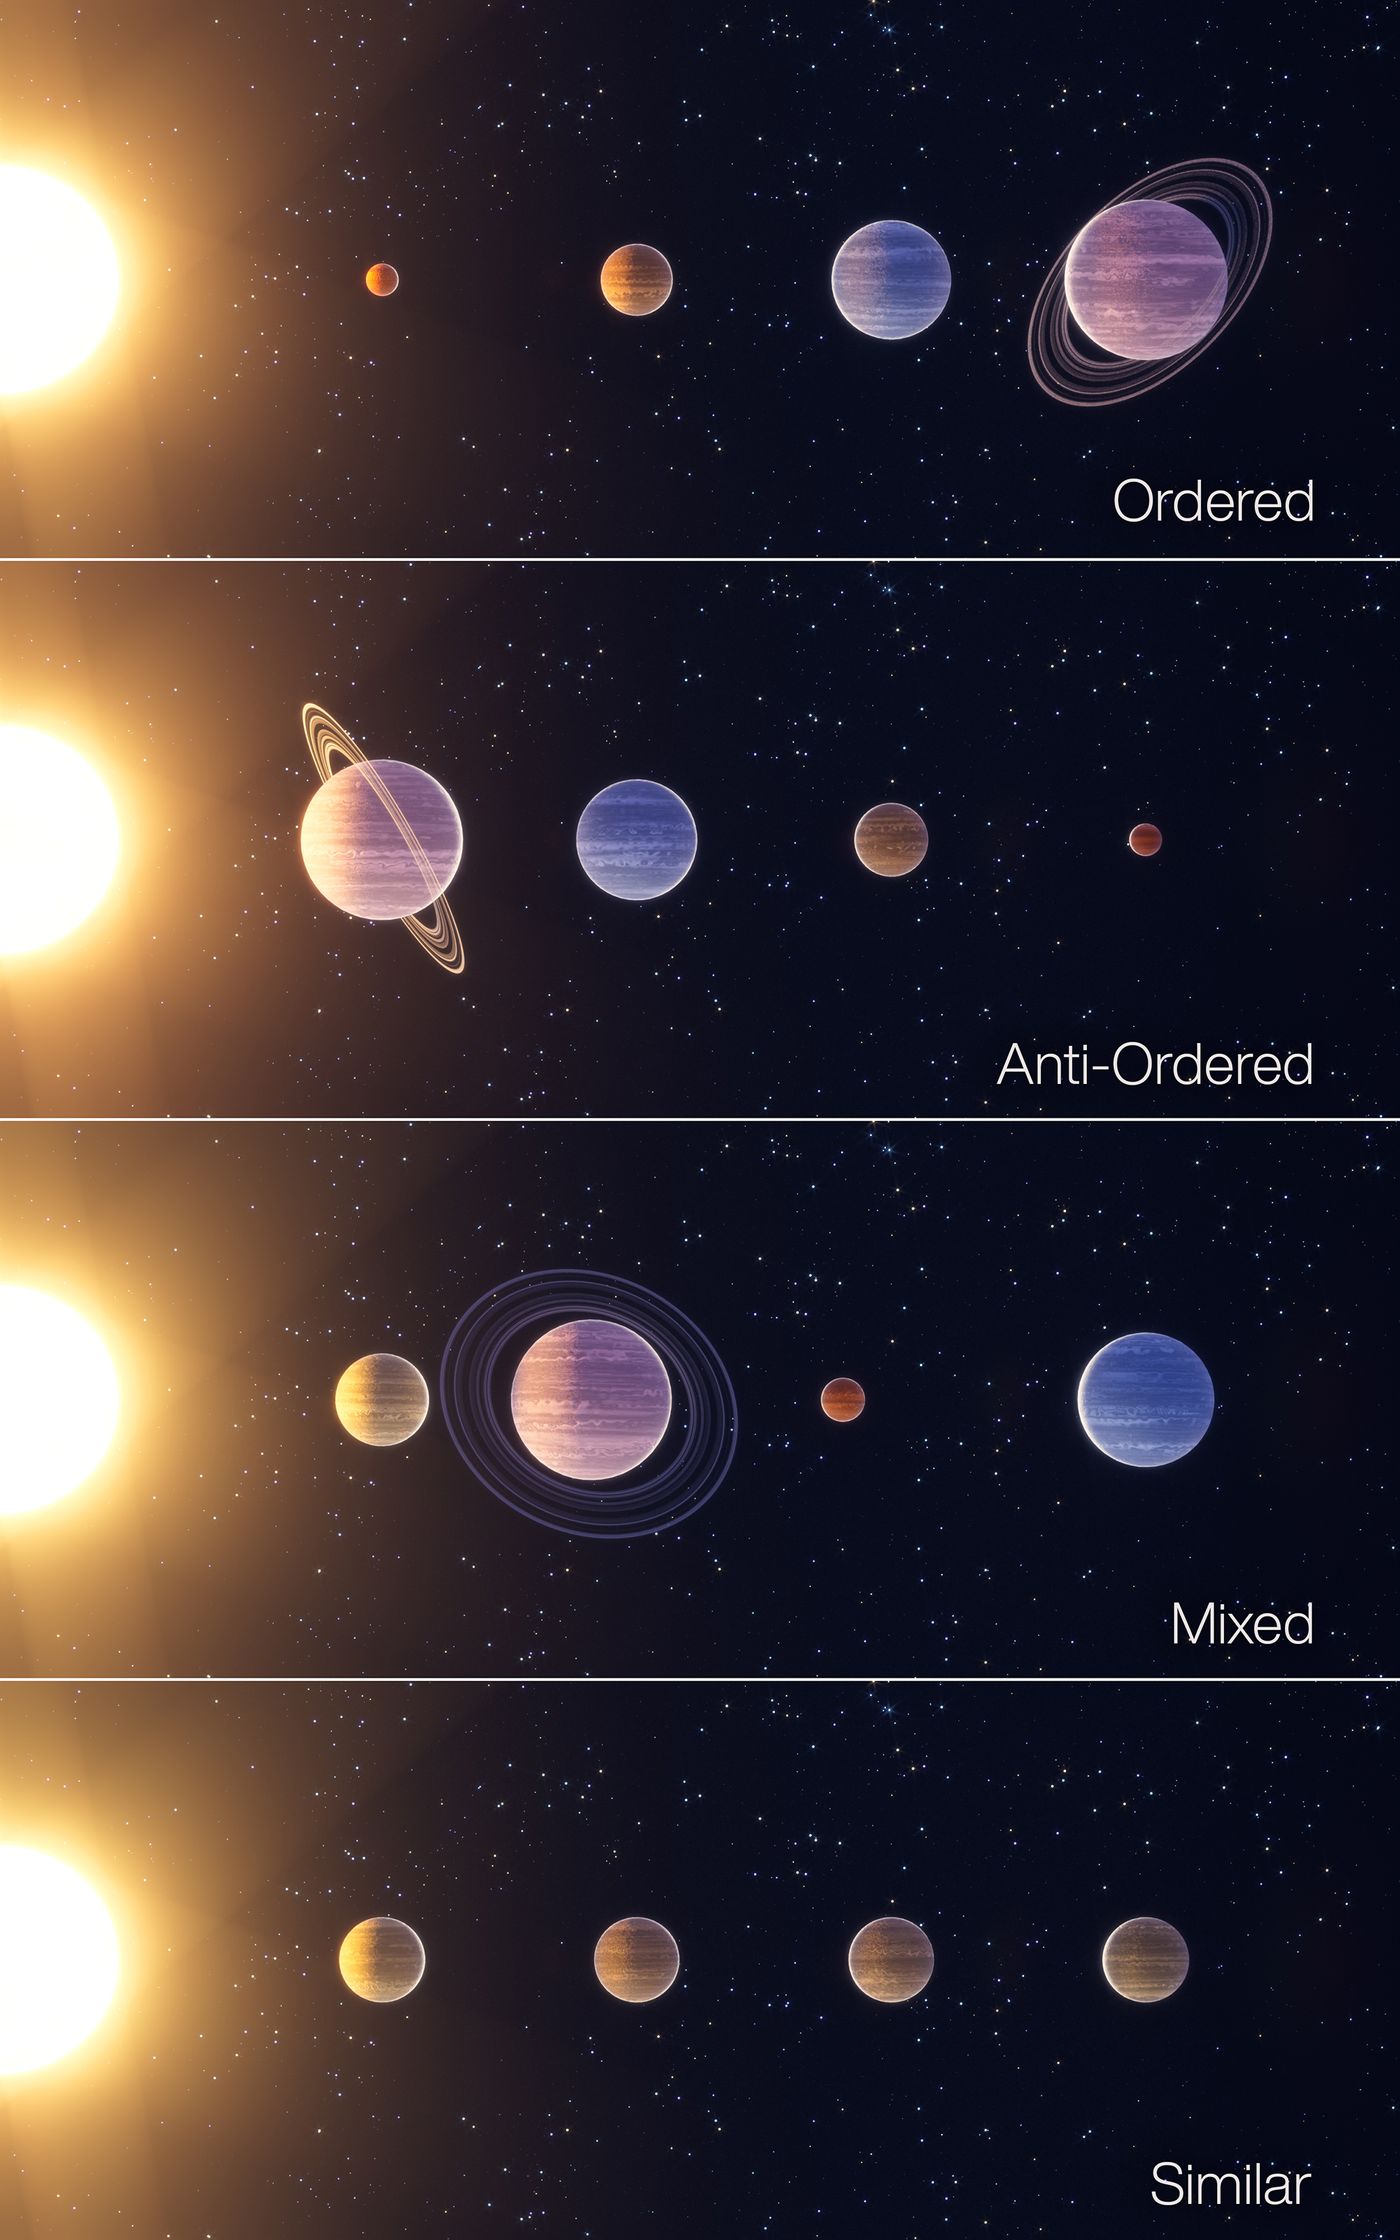 An artist's impression of the four classes of planetary system architecture. Credit: NCCR PlanetS, Tobias Stierli